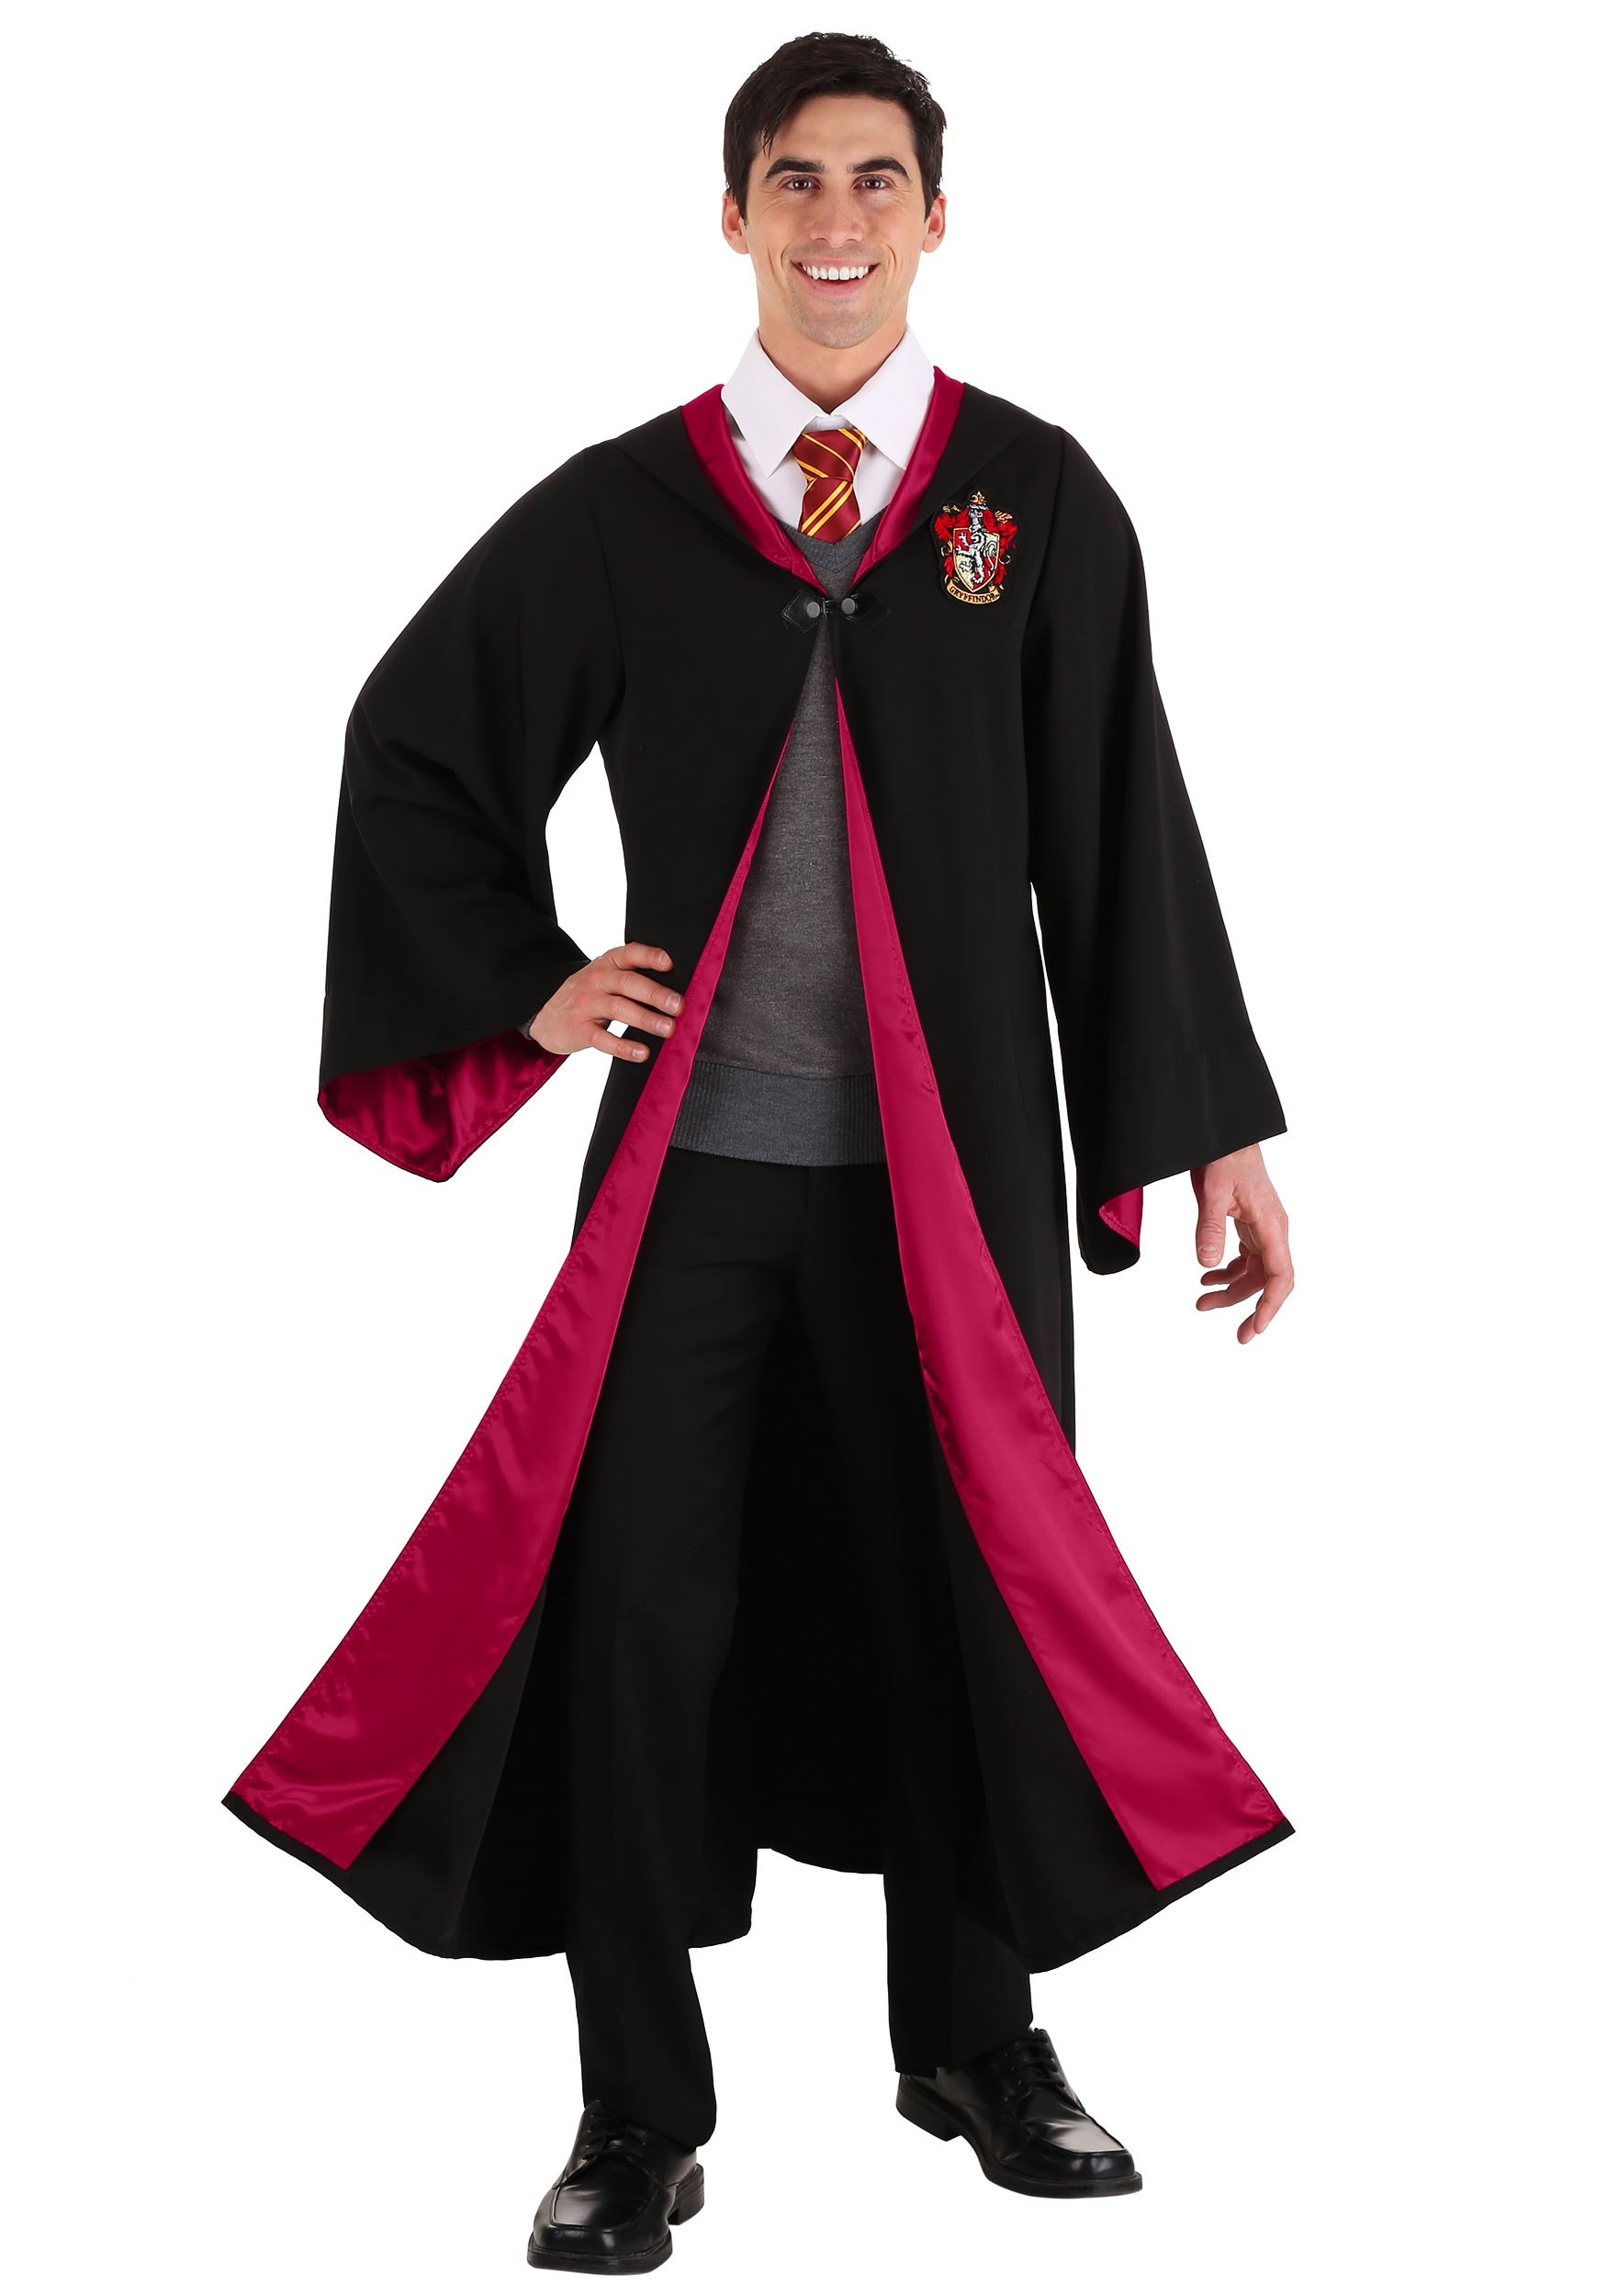 Image of Deluxe Adult's Harry Potter Costume ID FUN1444AD-L